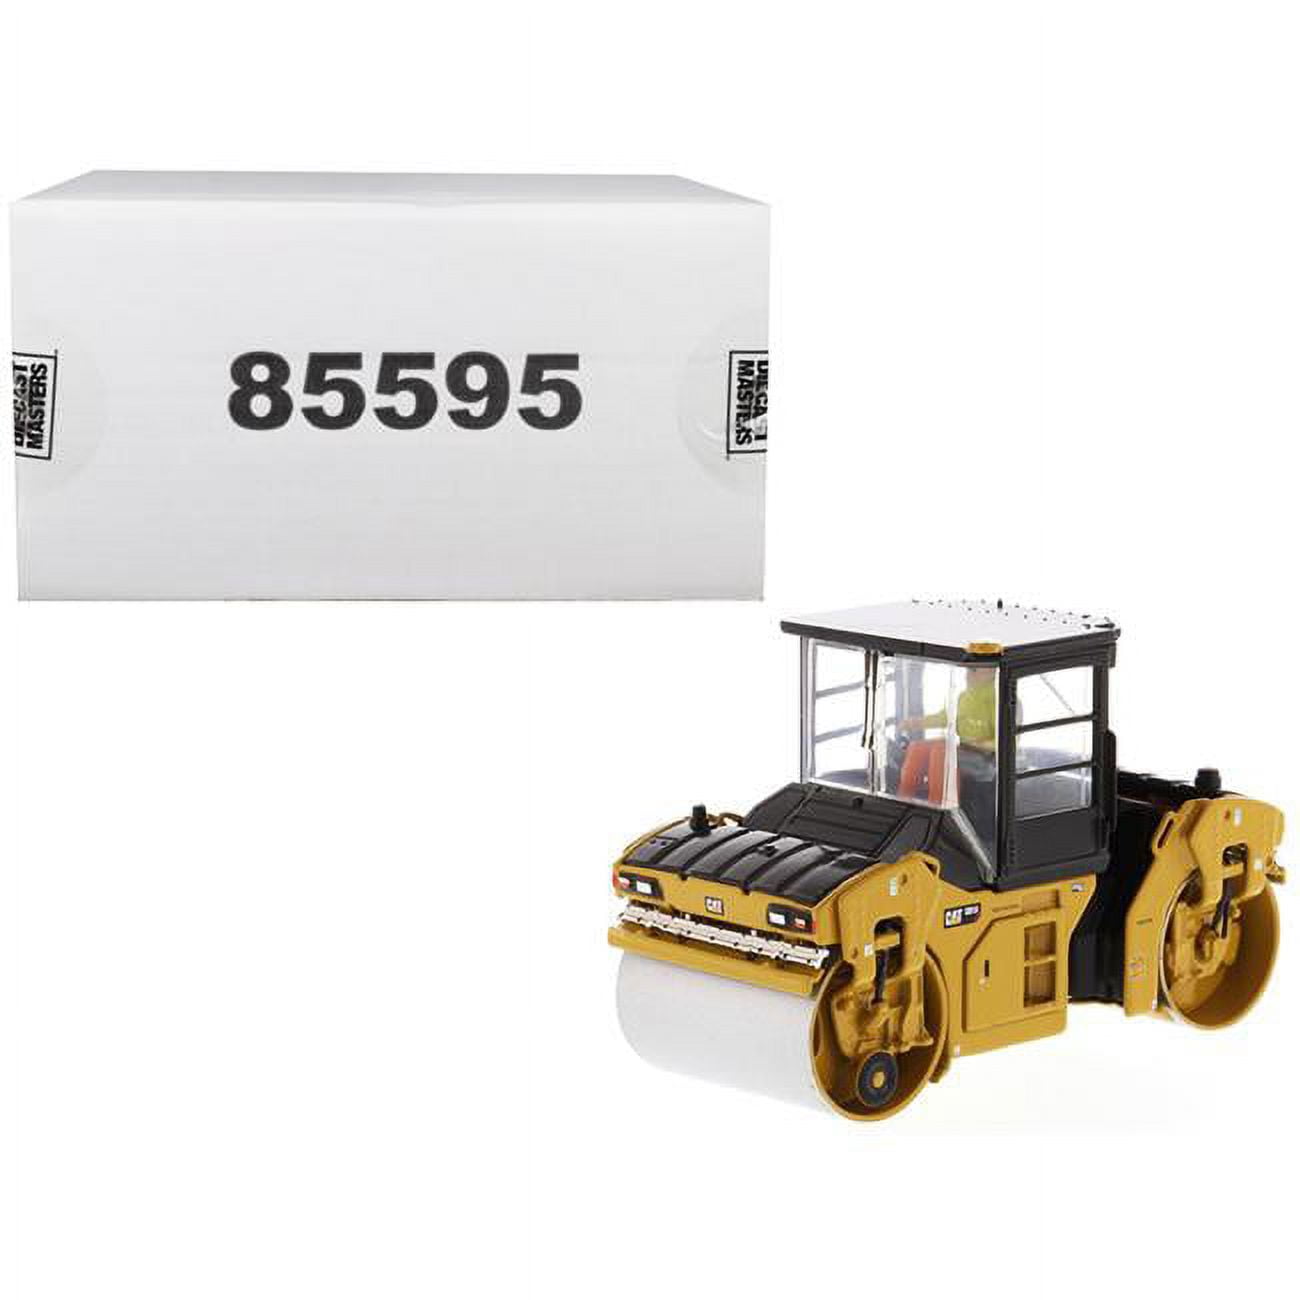 85595 Cat Caterpillar Cb-13 Tandem Vibratory Roller With Cab & Operator High Line Series 1 By 50 Diecast Model